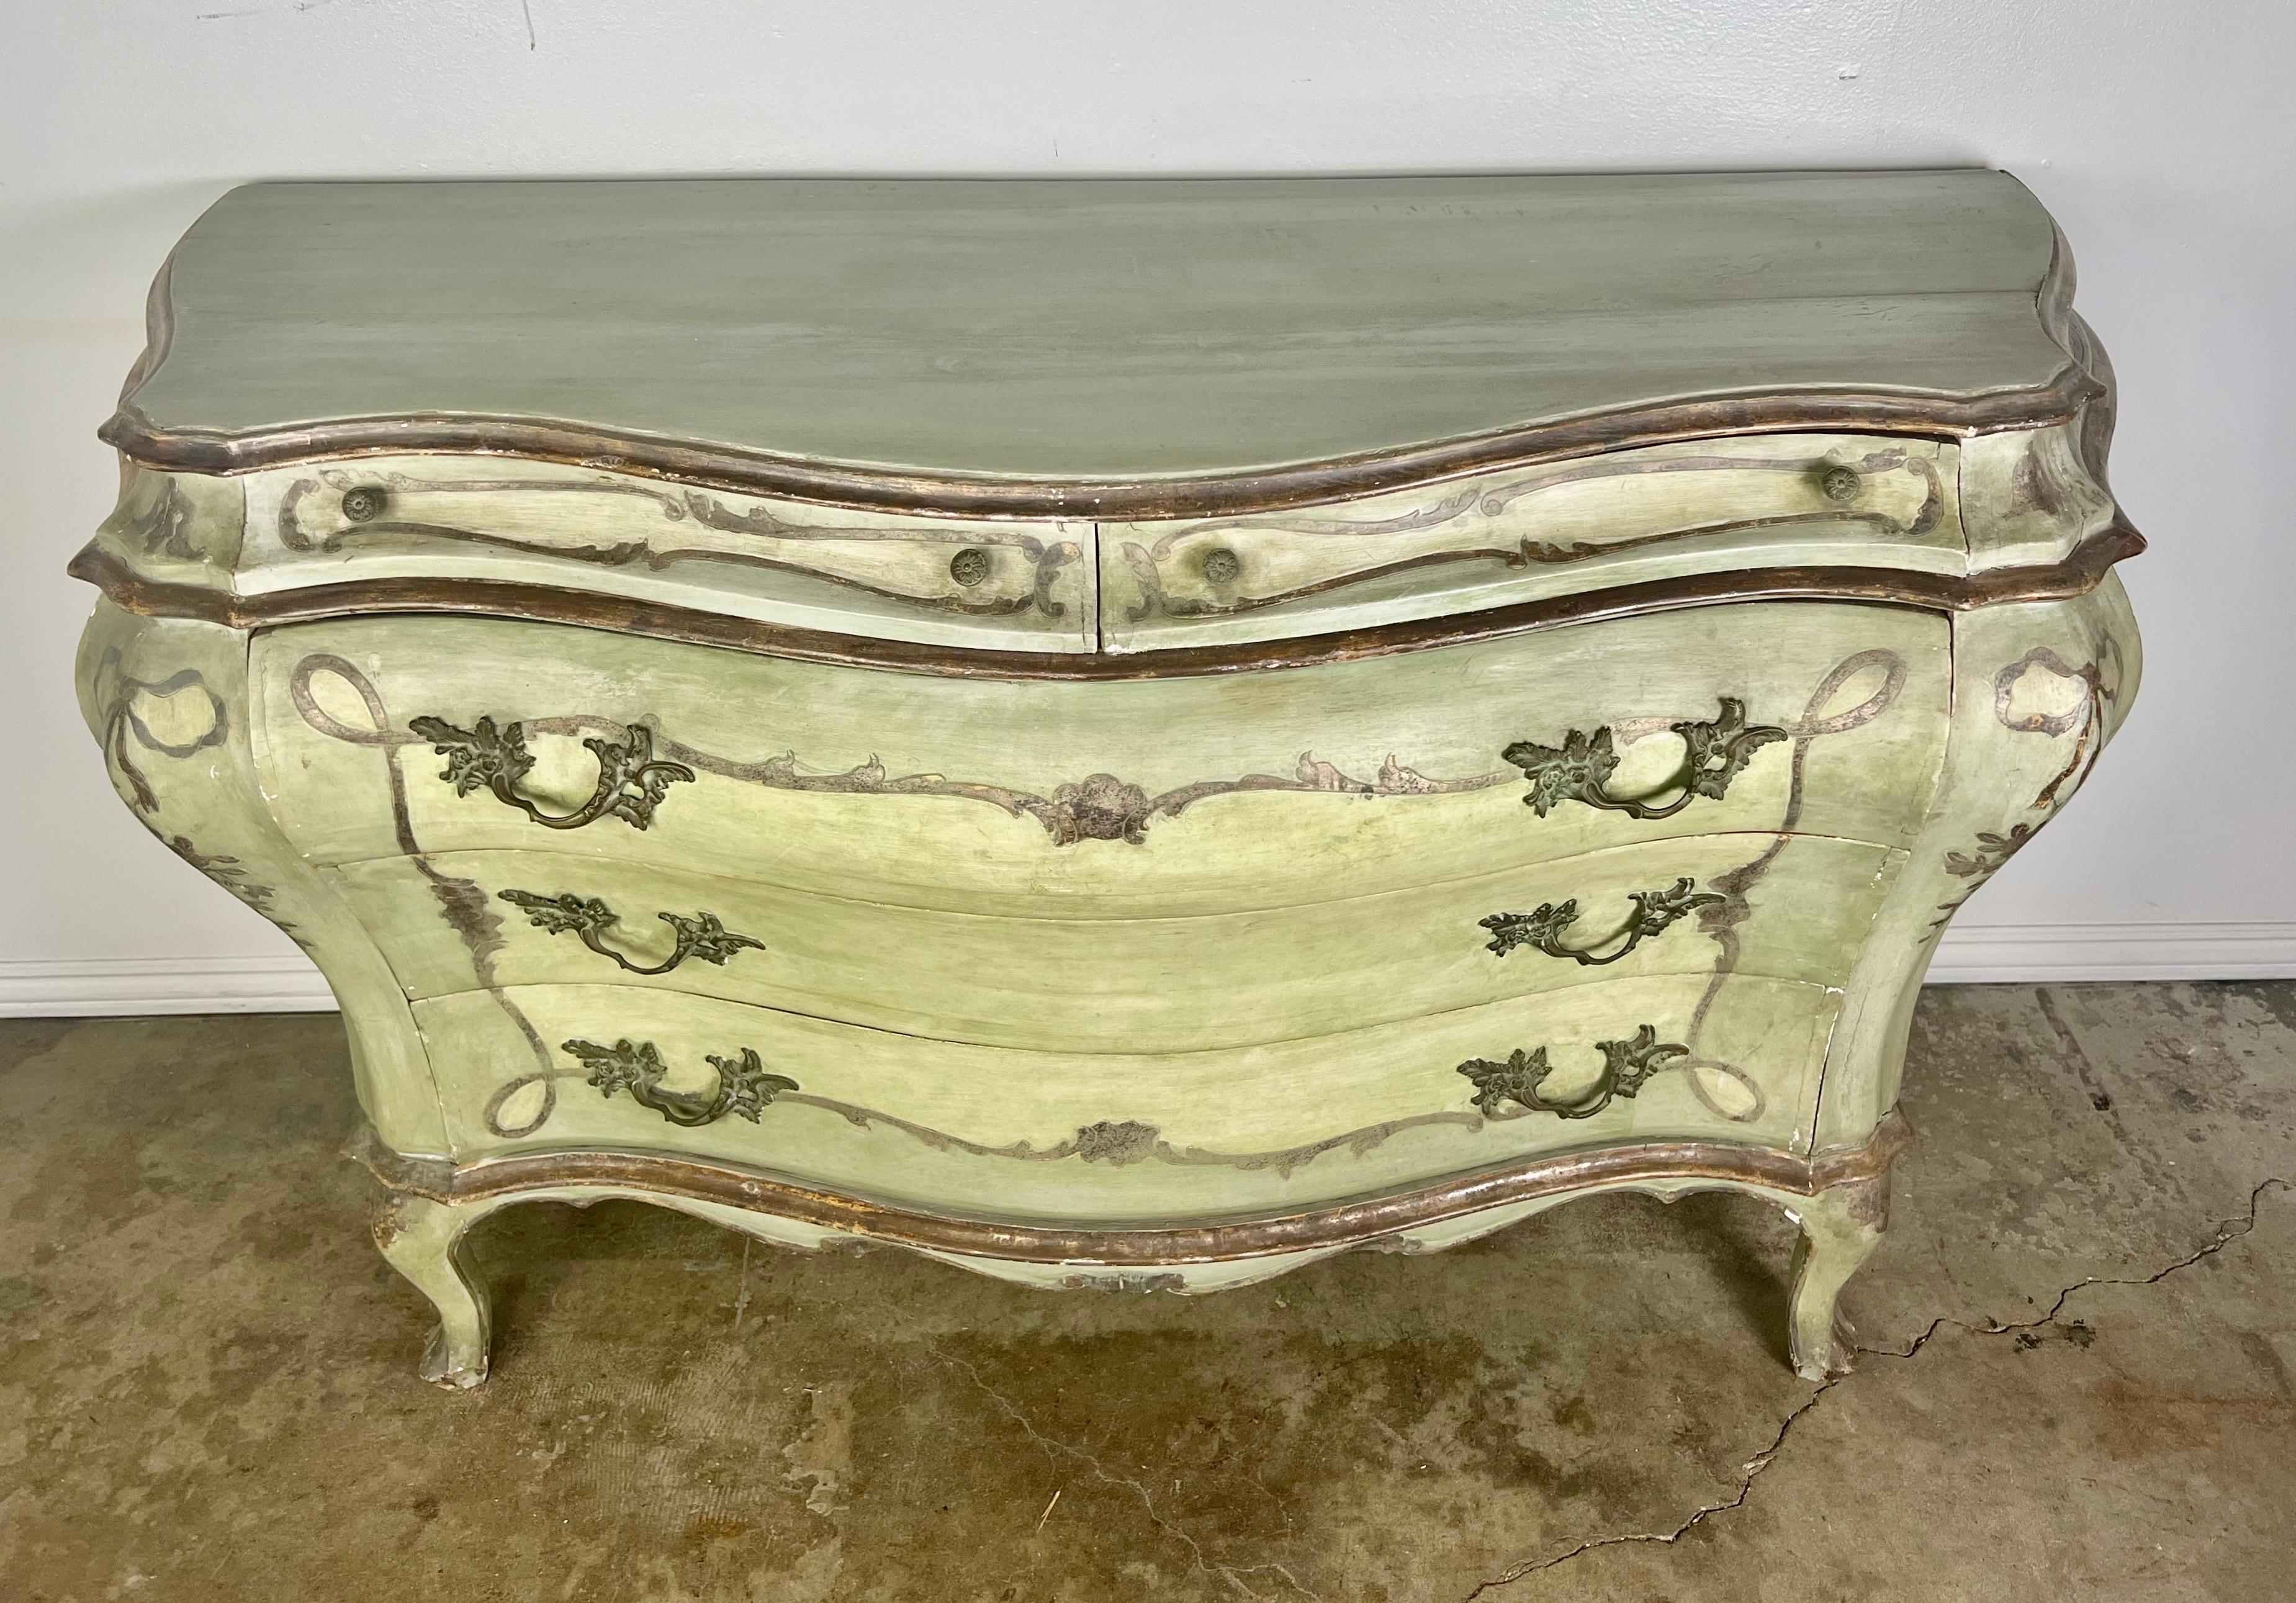 19th C. French Louis XV style commode. The original green painted and parcel gilt finish depicts bows and ribbon throughout. The Commode has five drawers with plenty of storage space. Wear is consistent with age but the paint is intact.